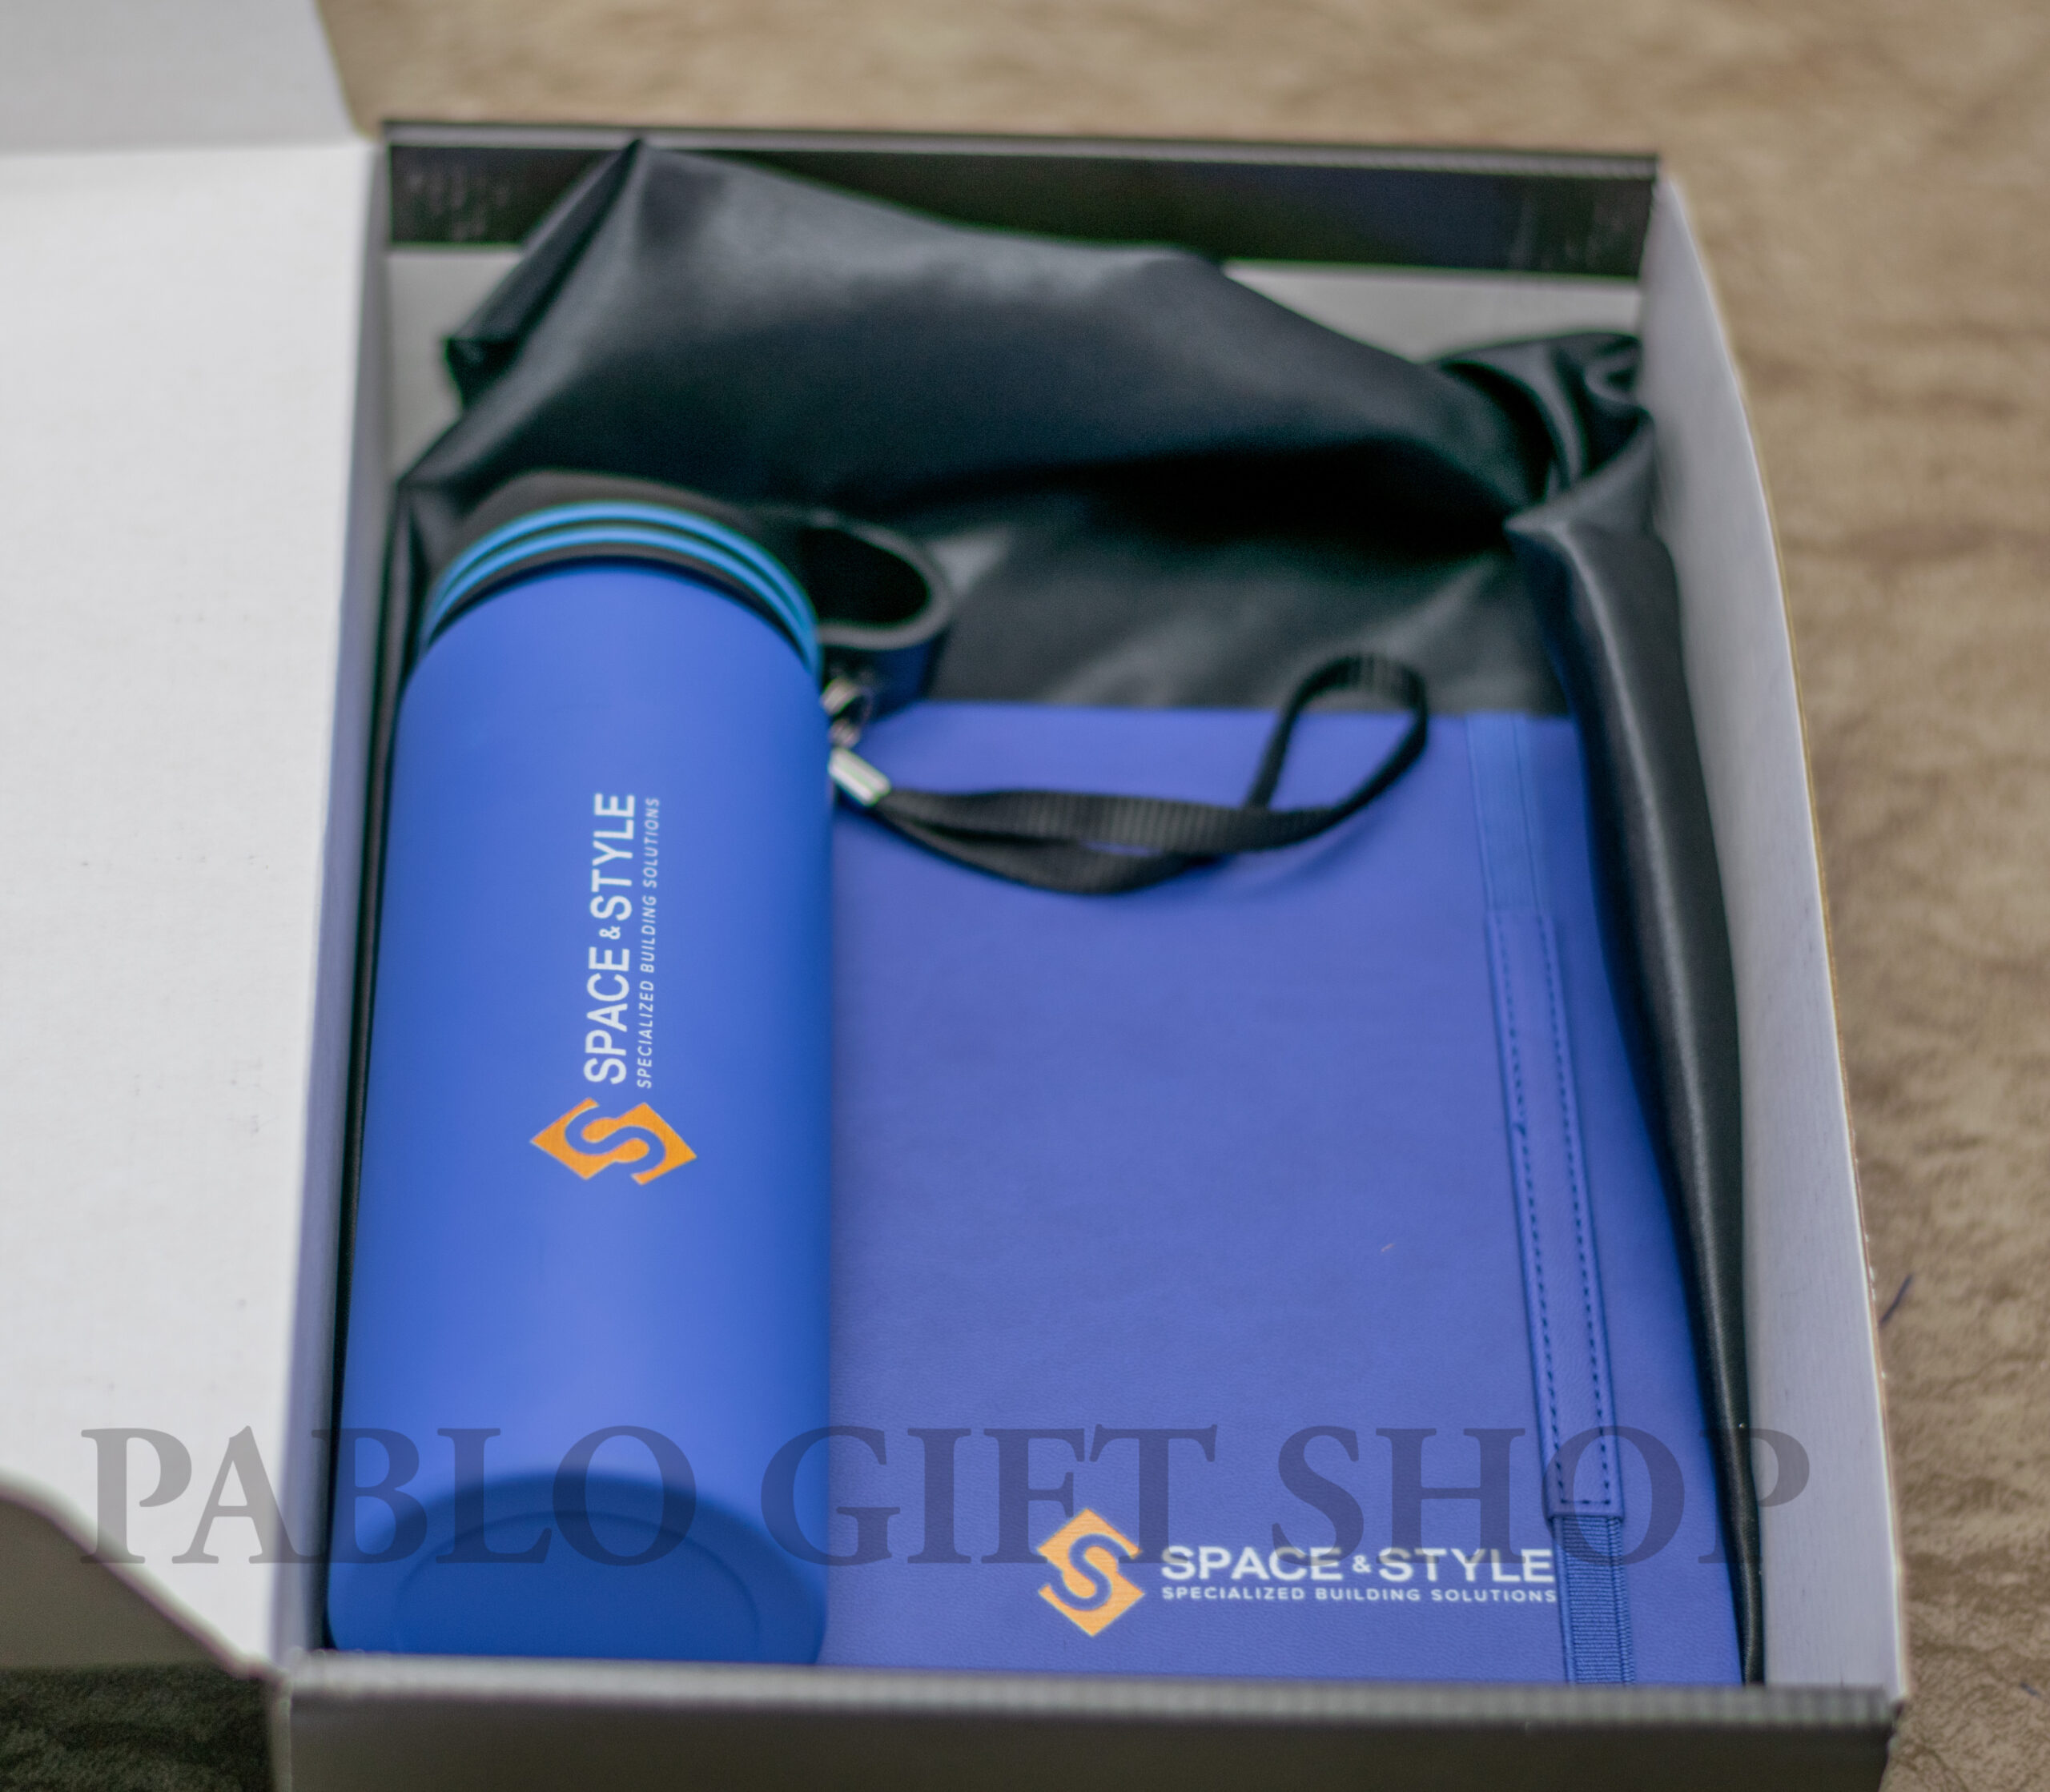 Branded Executive A5 Notebook and Water Bottle